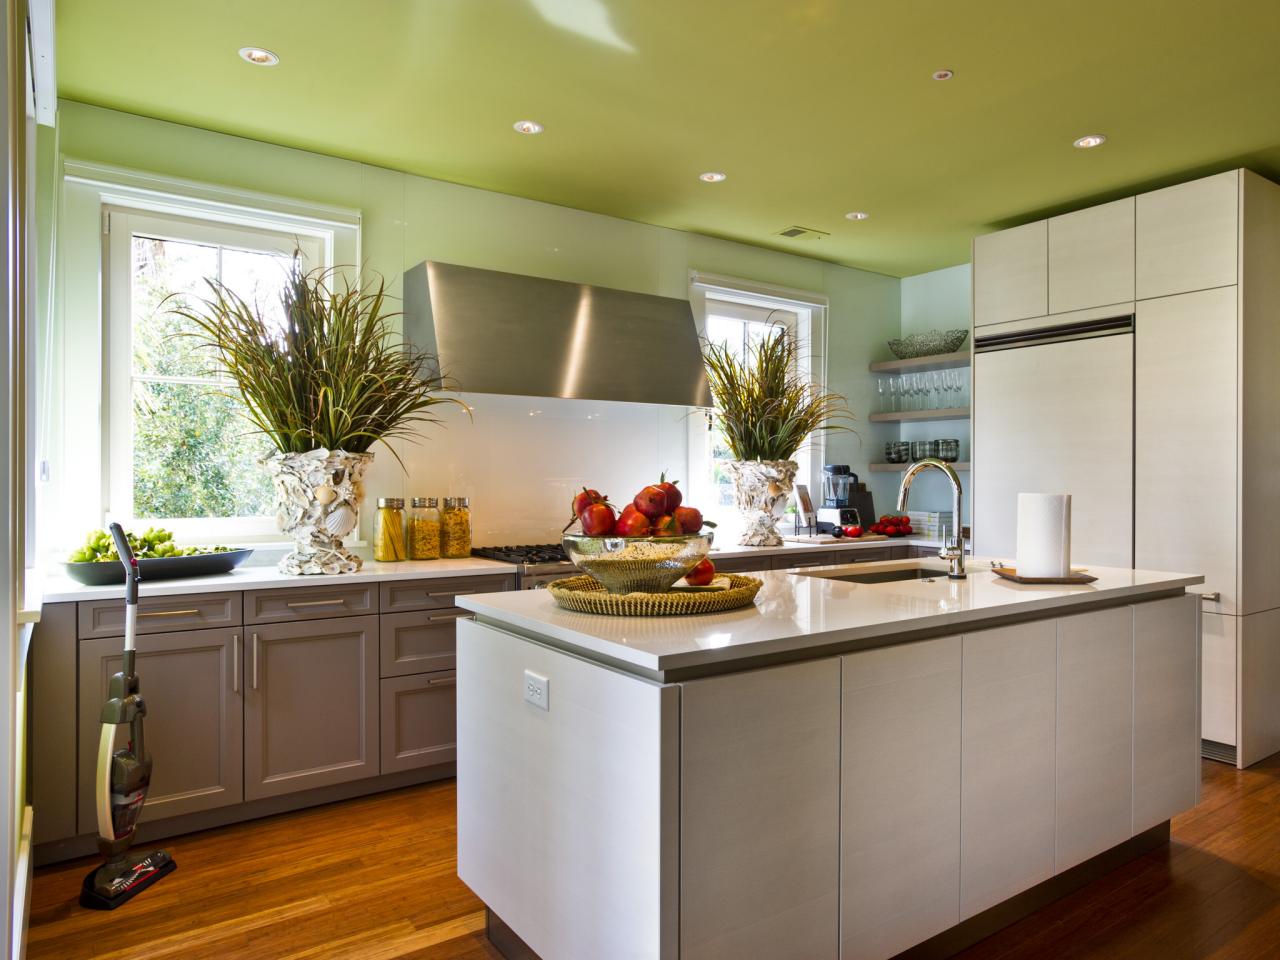 Painting Kitchen Ceilings Pictures, Ideas & Tips From HGTV   HGTV